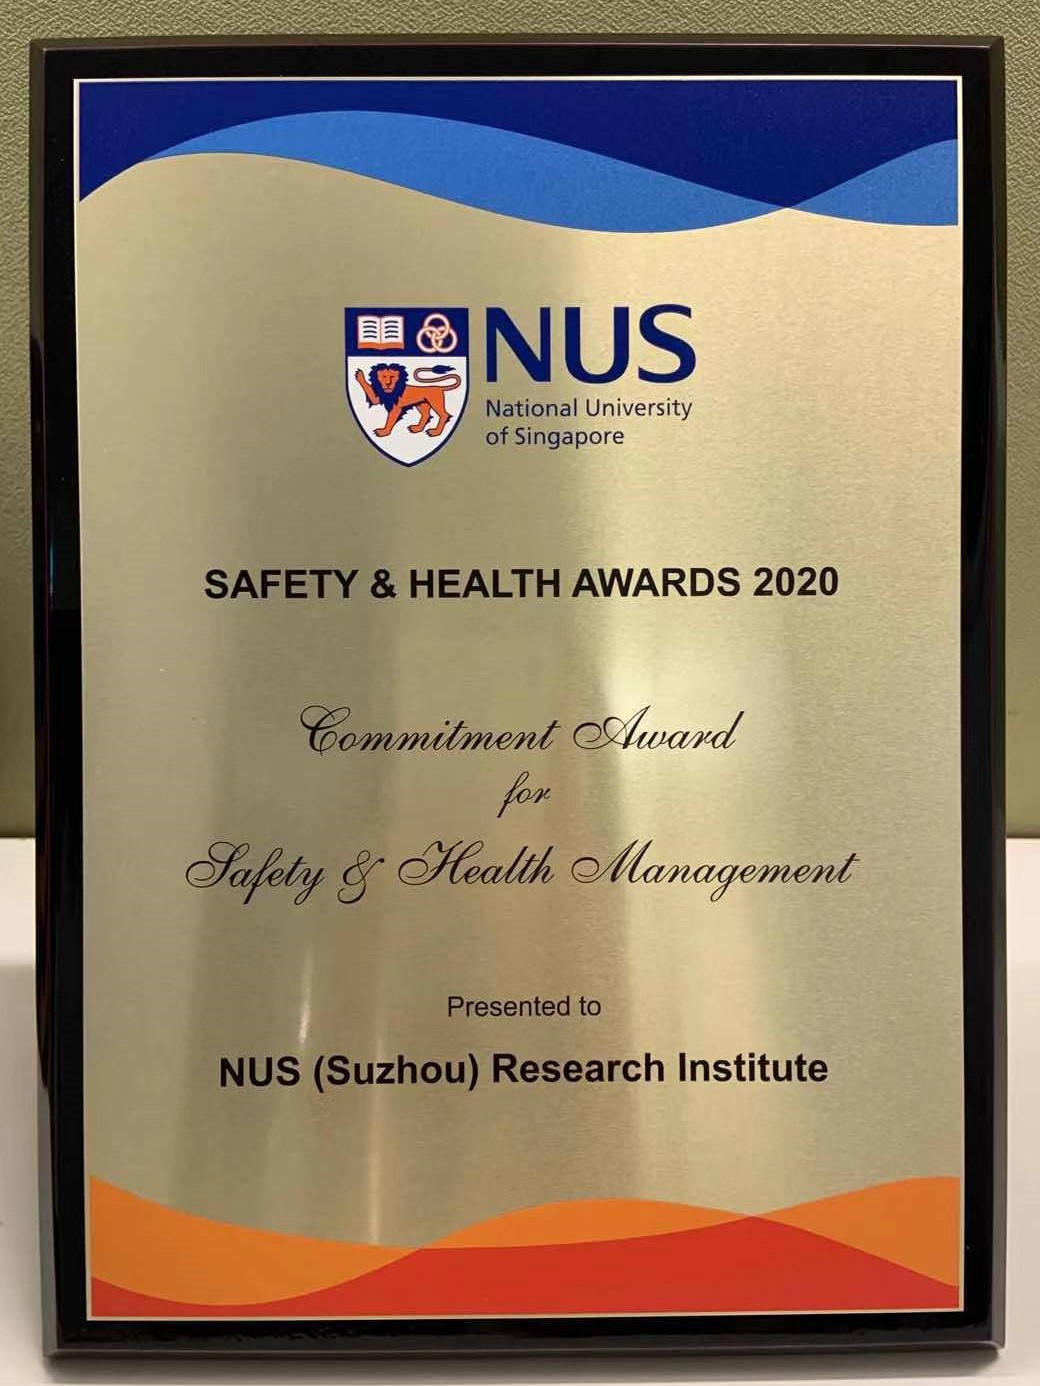 NUSRI Suzhou recognises with Commitment Award for Safety and Health Performance for the second year running